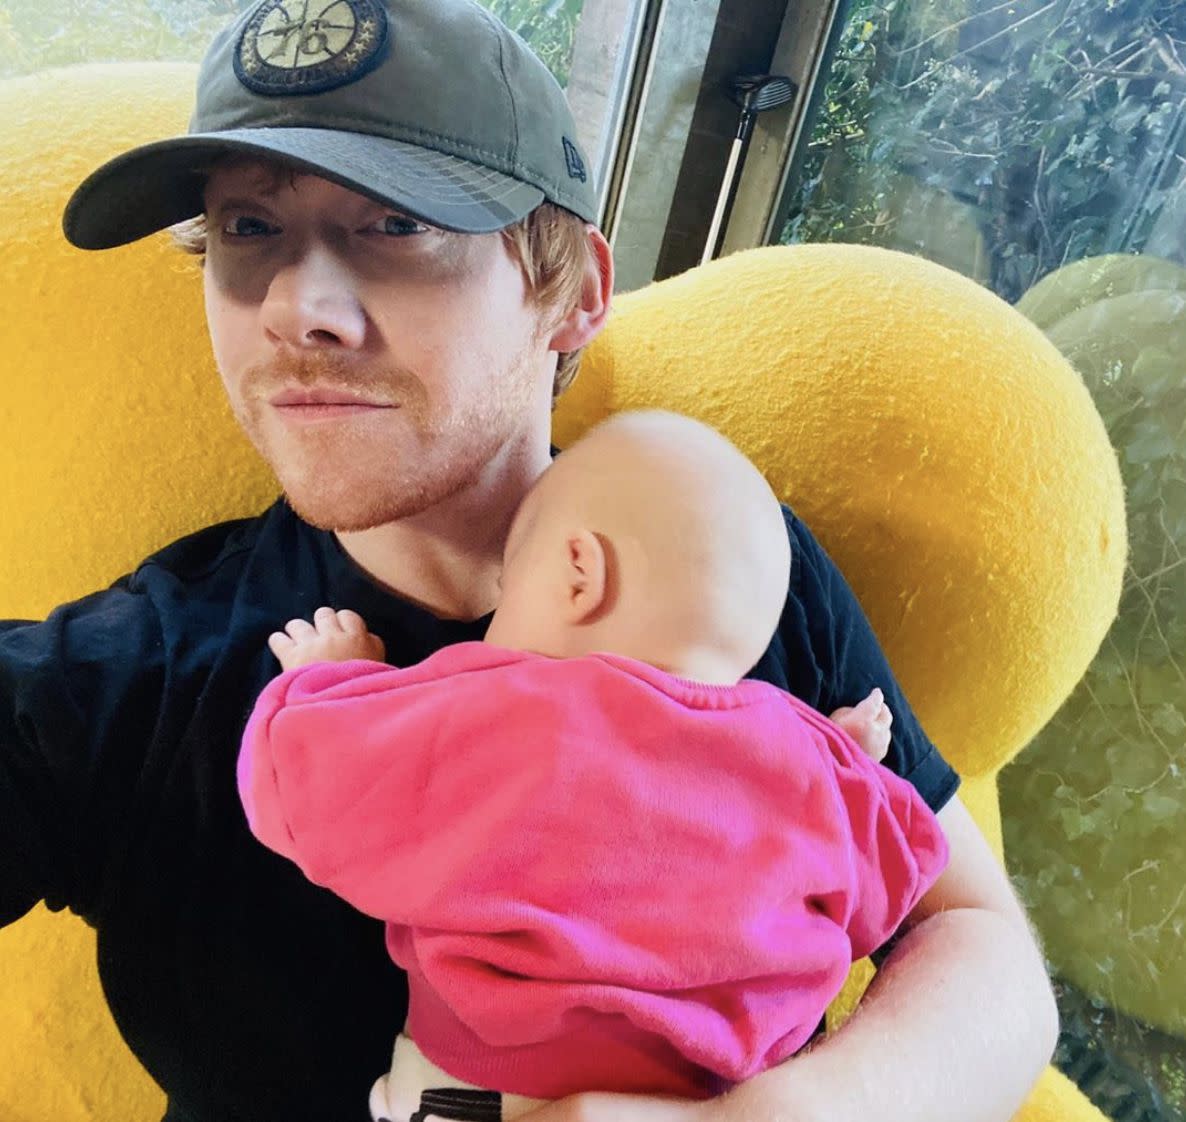 "Harry Potter" star Rupert Grint finally joined Instagram and used his first post to share a sweet selfie with his baby girl Wednesday. Grint and long-time partner Georgia Groome welcomed their first child together six months ago. "Hey Instagram....only 10 years late, but here I am. Grint on the Gram! Here to introduce you all to Wednesday G. Grint. Stay safe, Rupert."